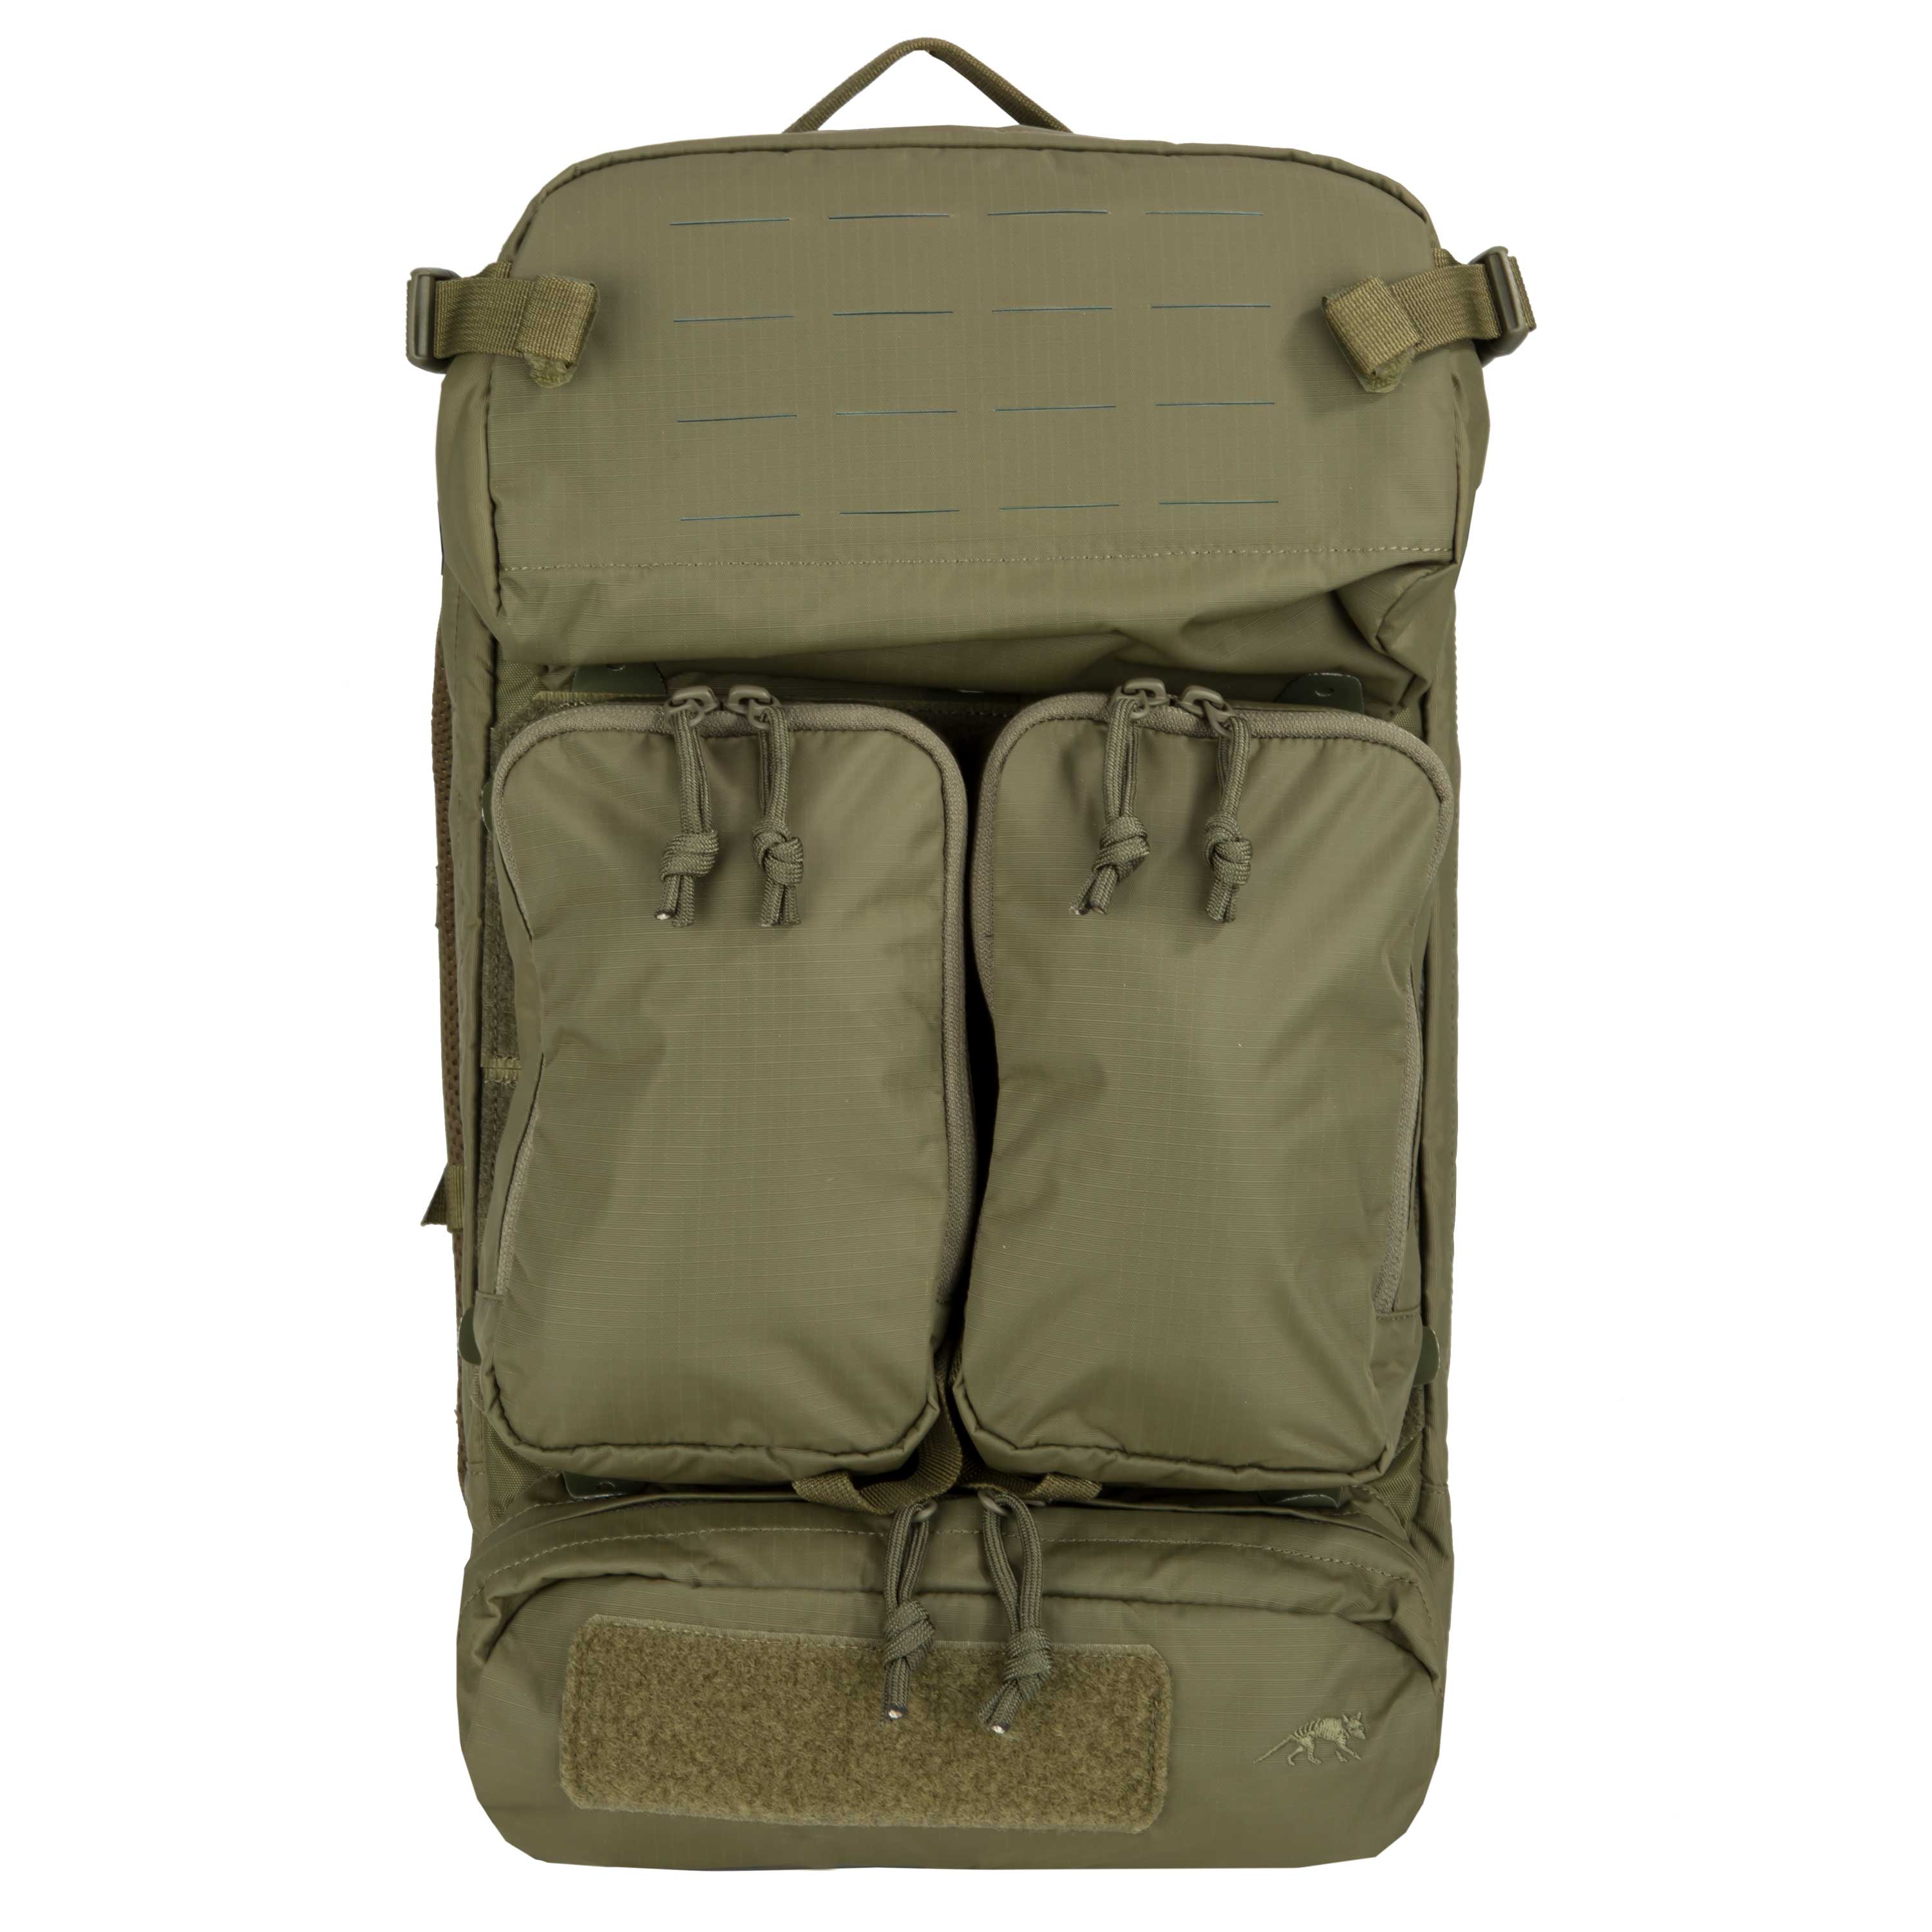 Purchase the TT Backpack Modular Gunners Pack olive by ASMC